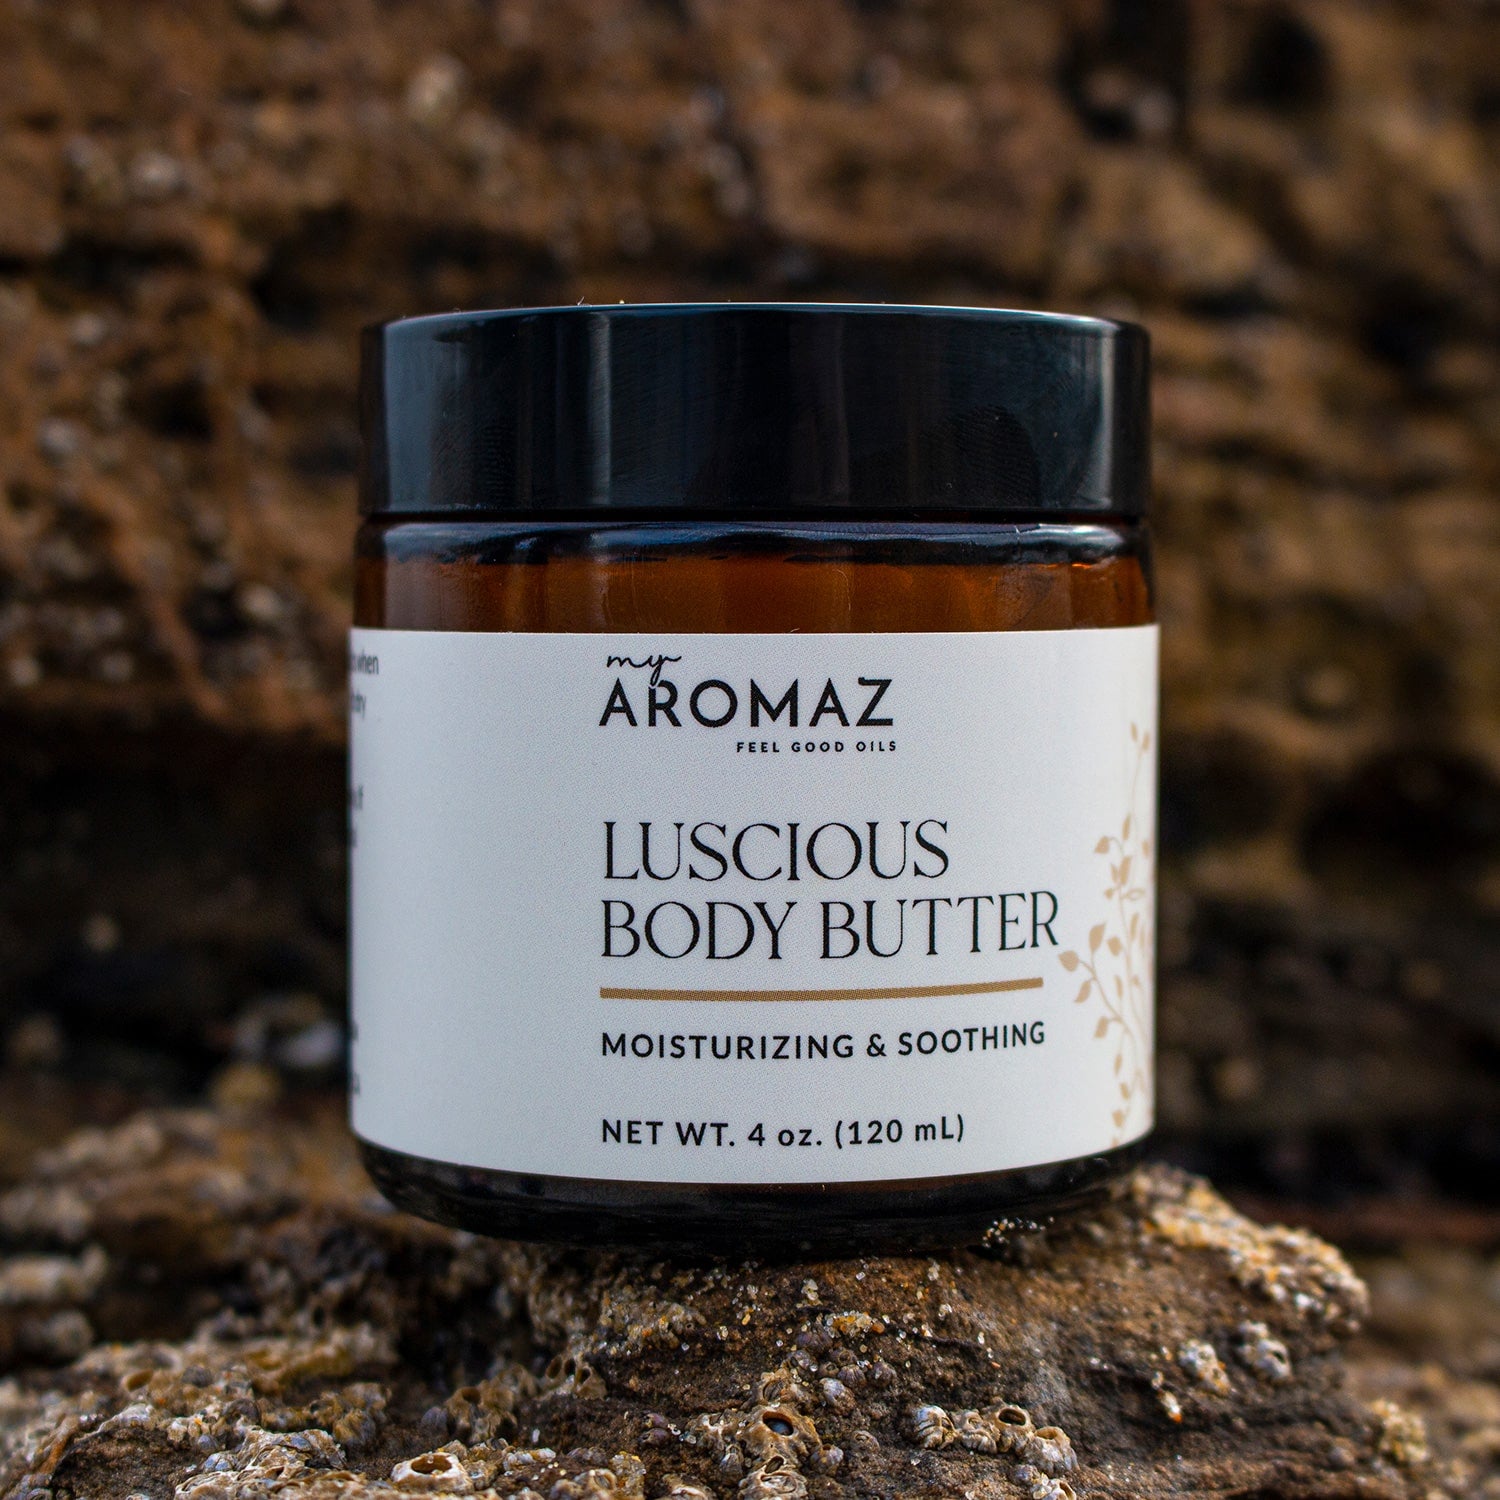 Luscious Body Butter with shea butter and calendula oil